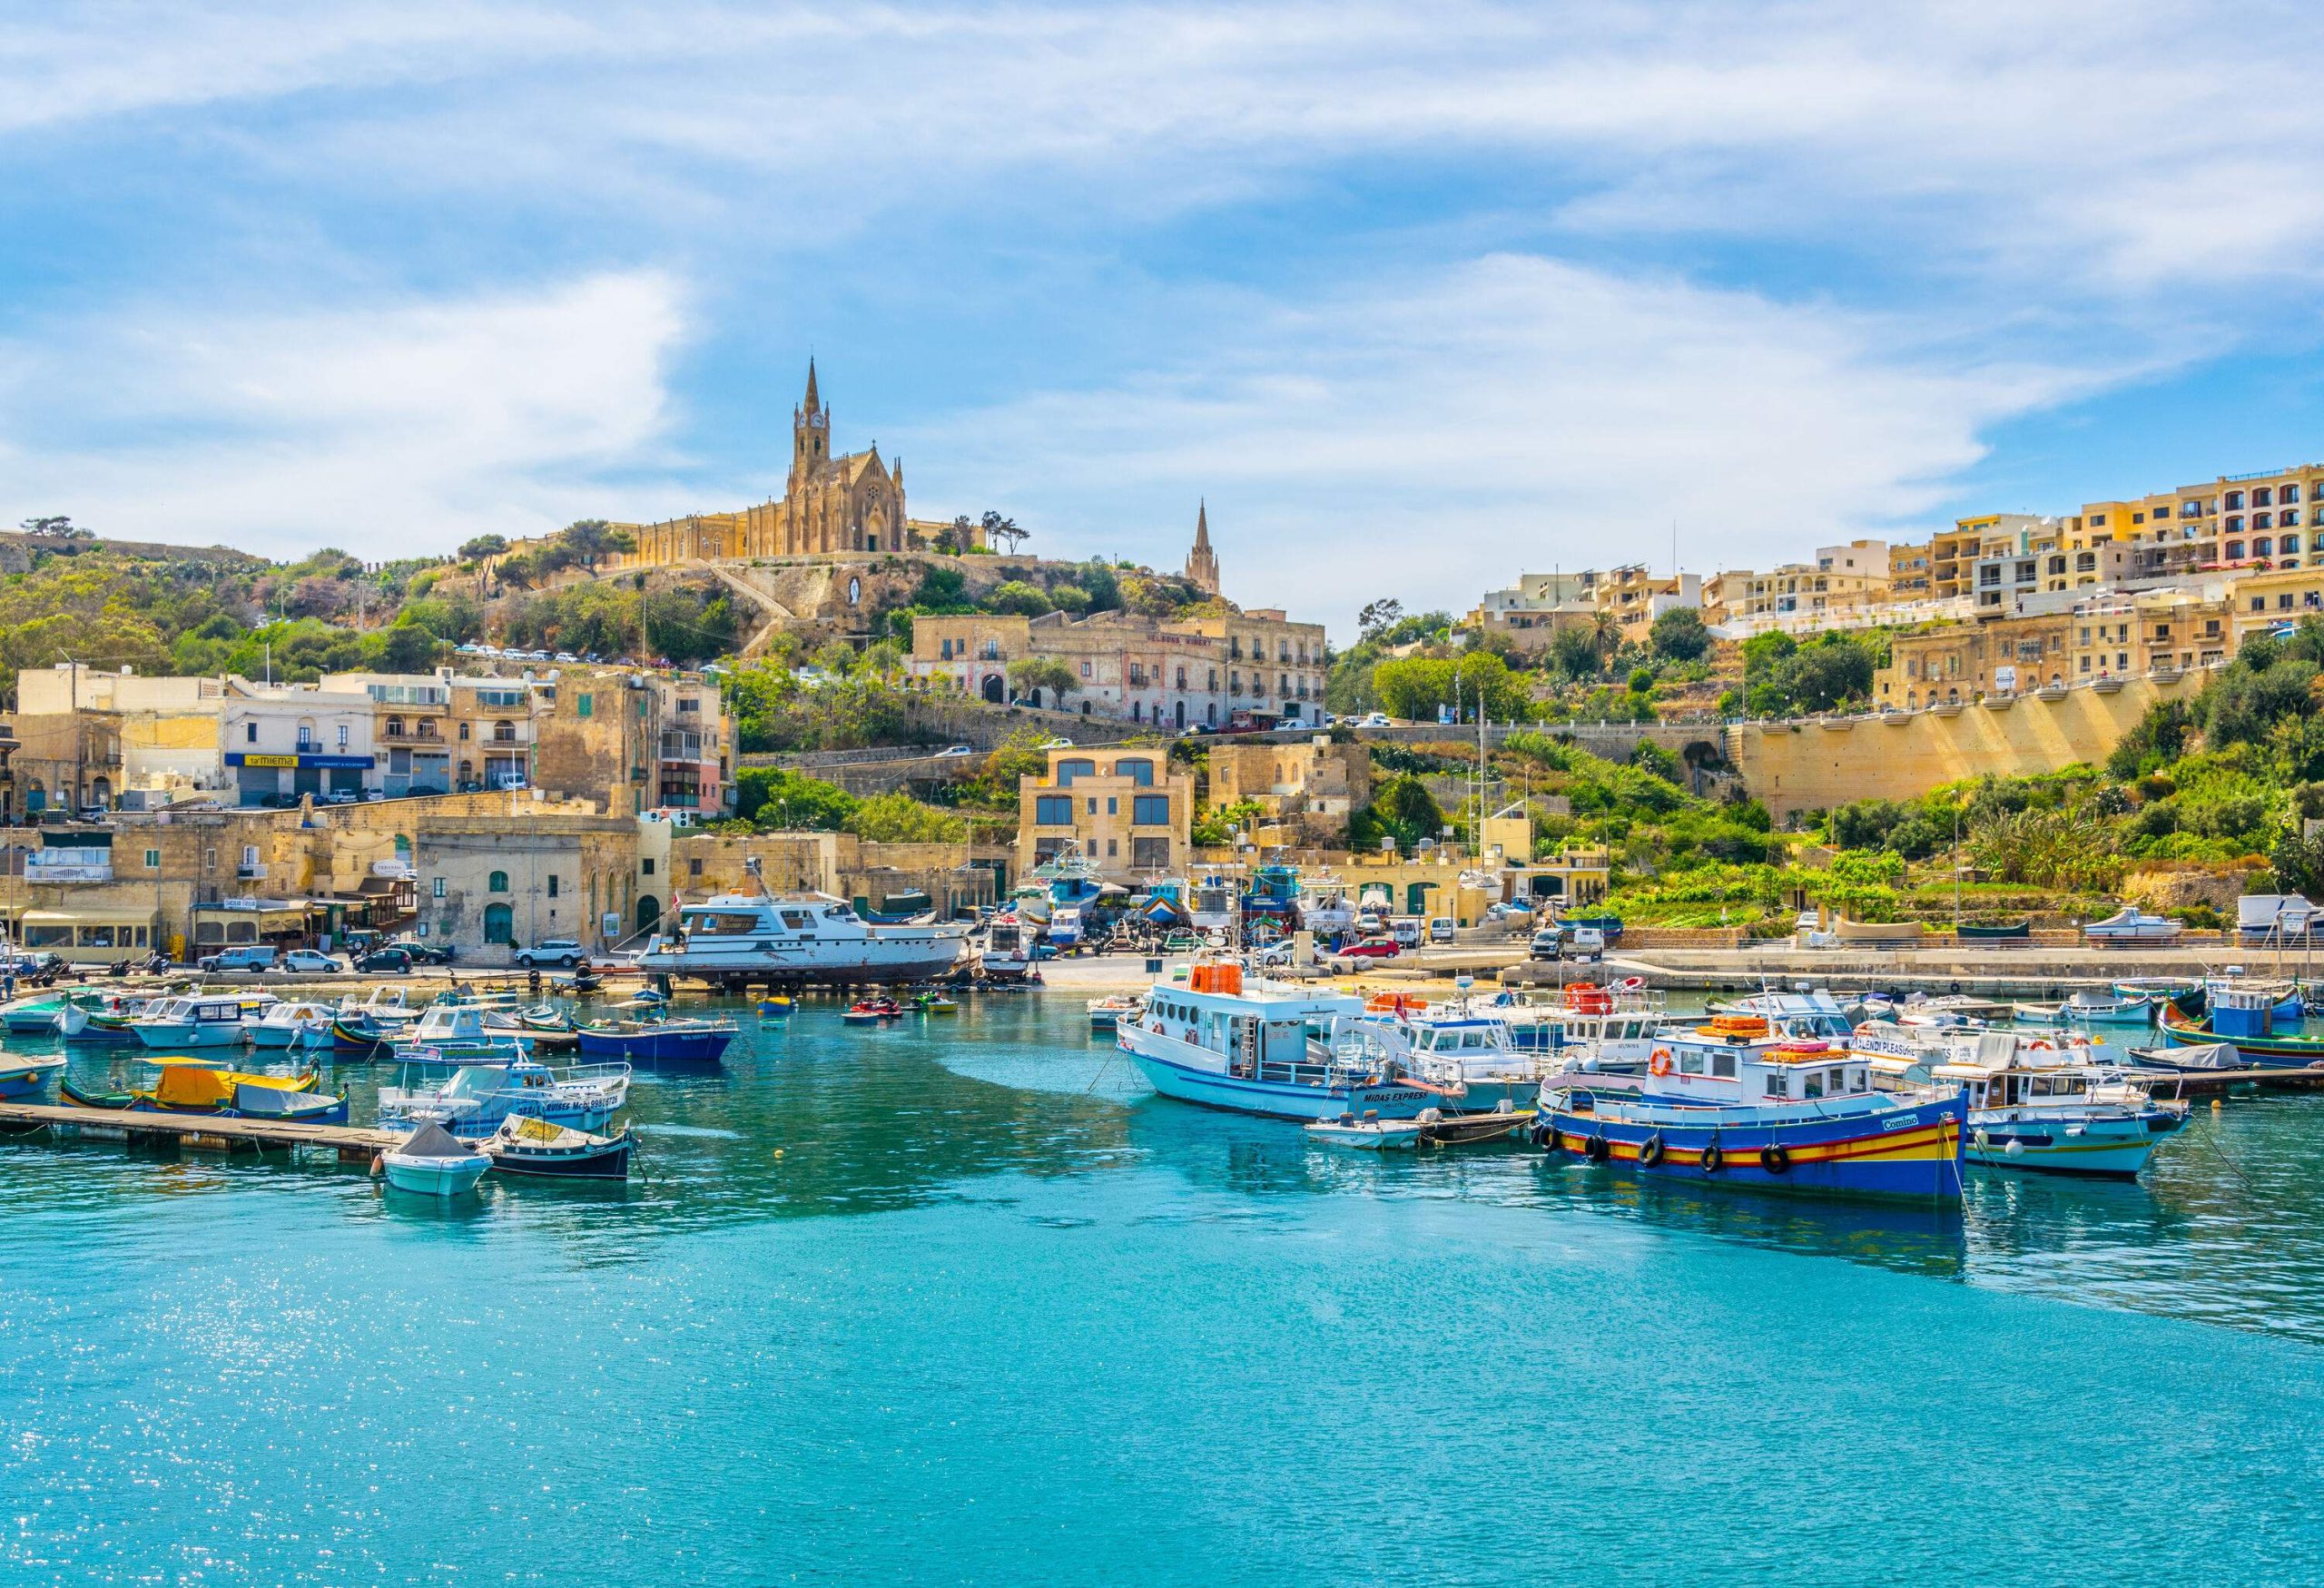 A bustling port town with boats moored in the harbour and historic structures dotting the coastline.